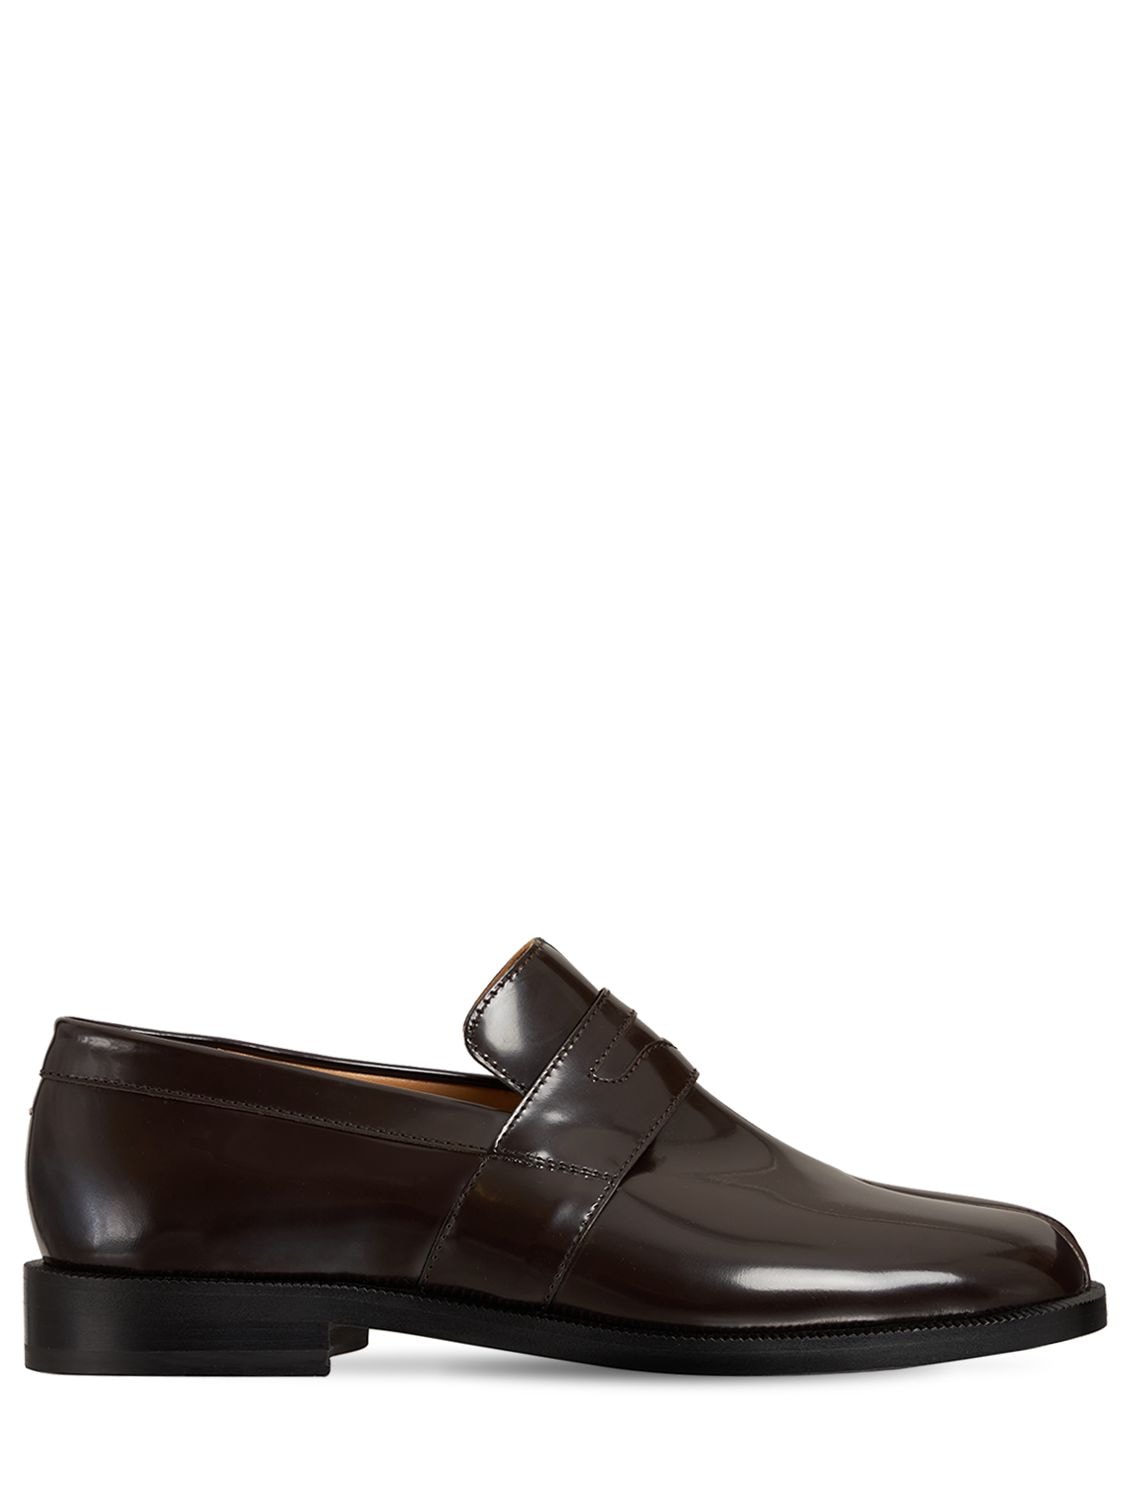 Maison Margiela 20mm Tabi Brushed Leather Loafers In Brown | ModeSens